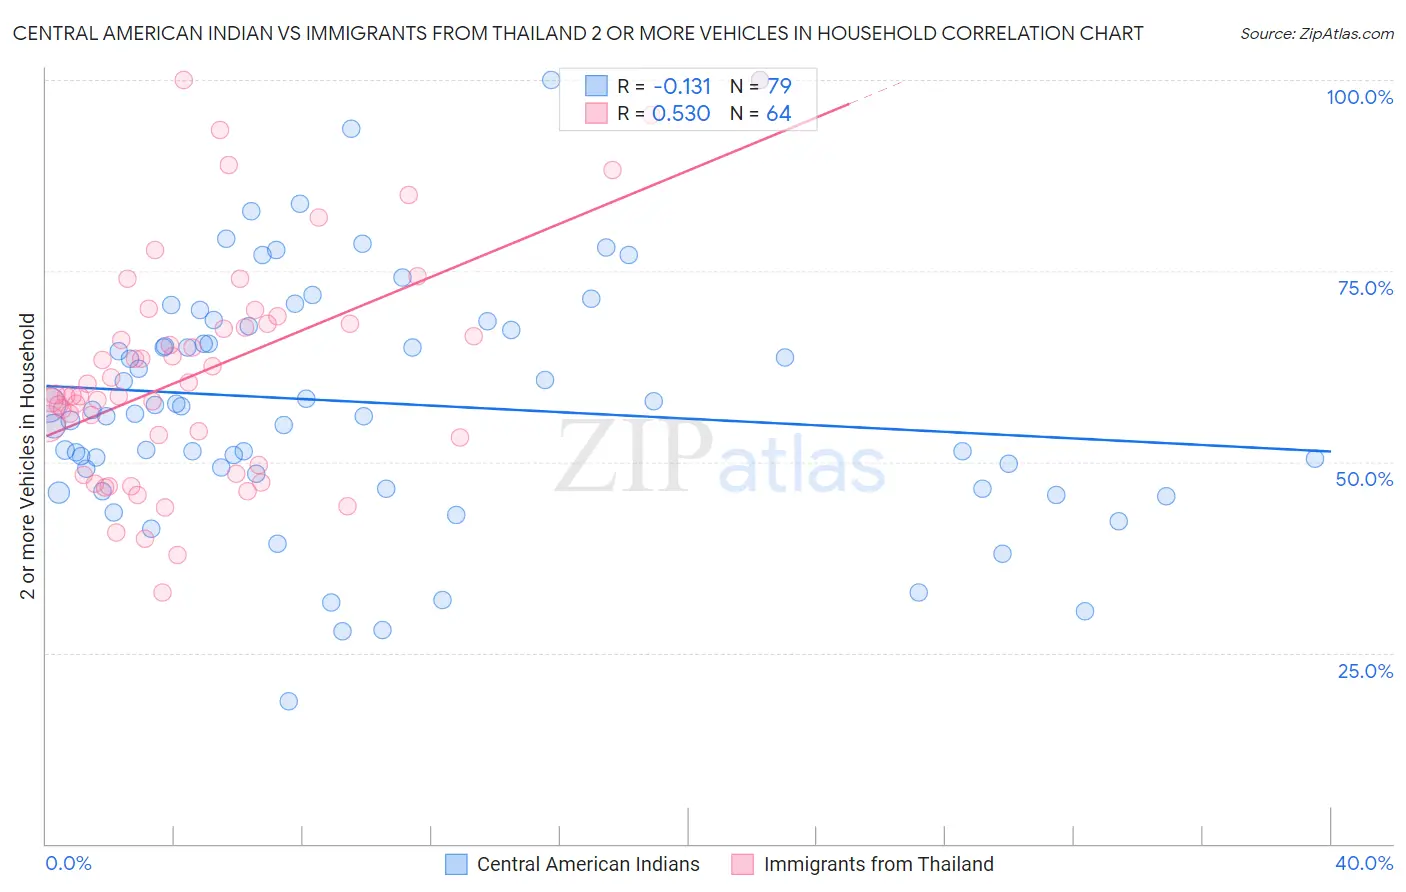 Central American Indian vs Immigrants from Thailand 2 or more Vehicles in Household